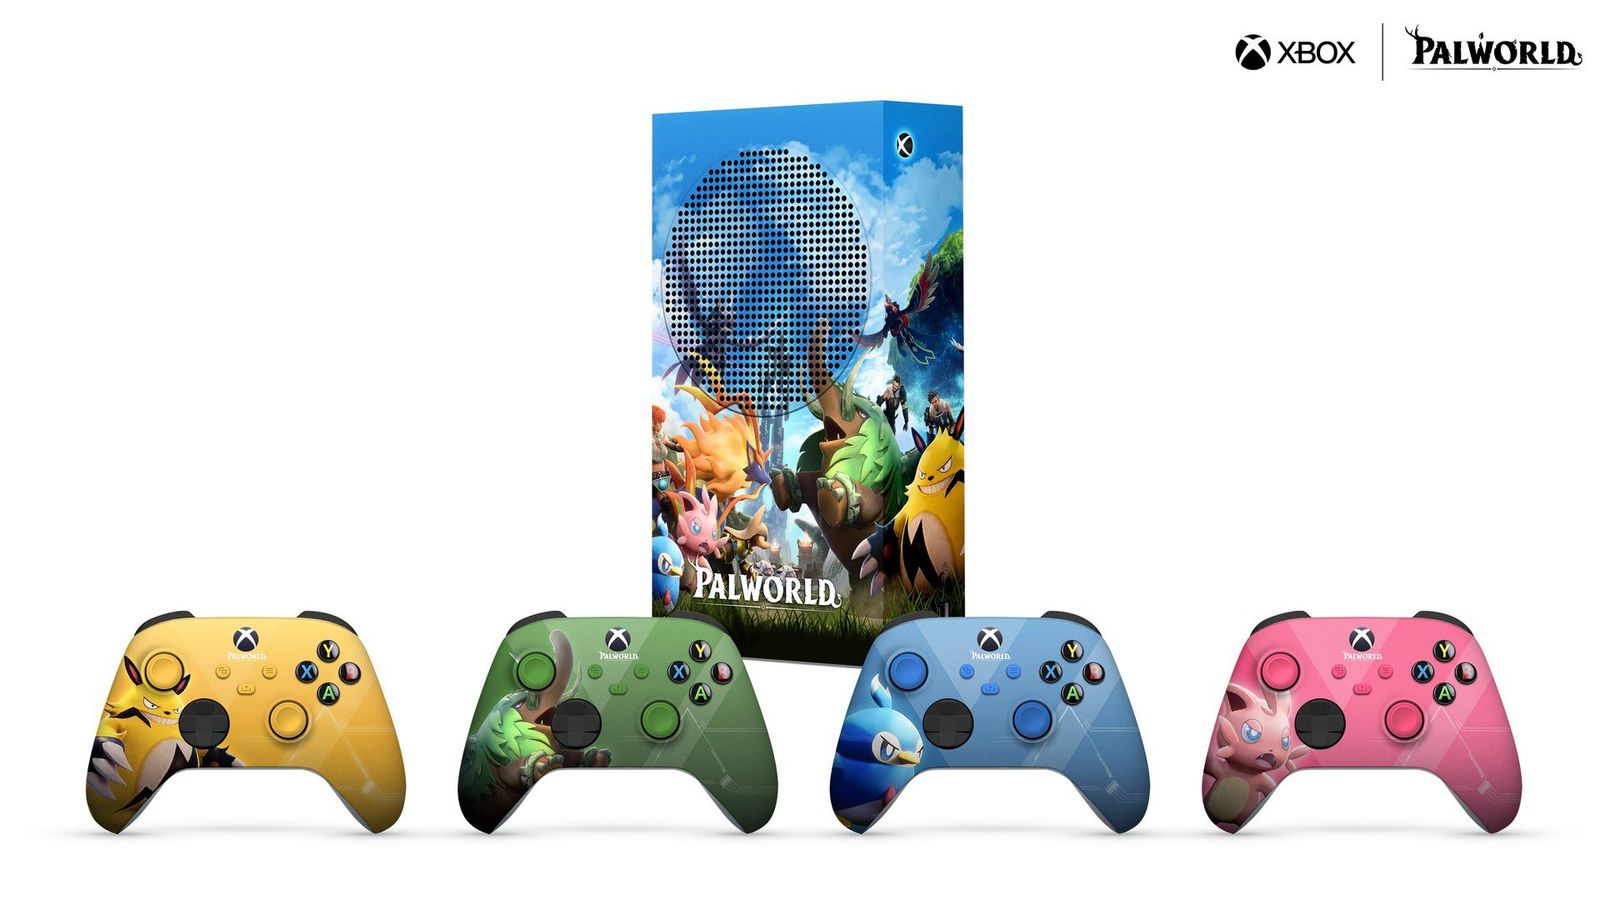 palworld themed xbox series s and controller